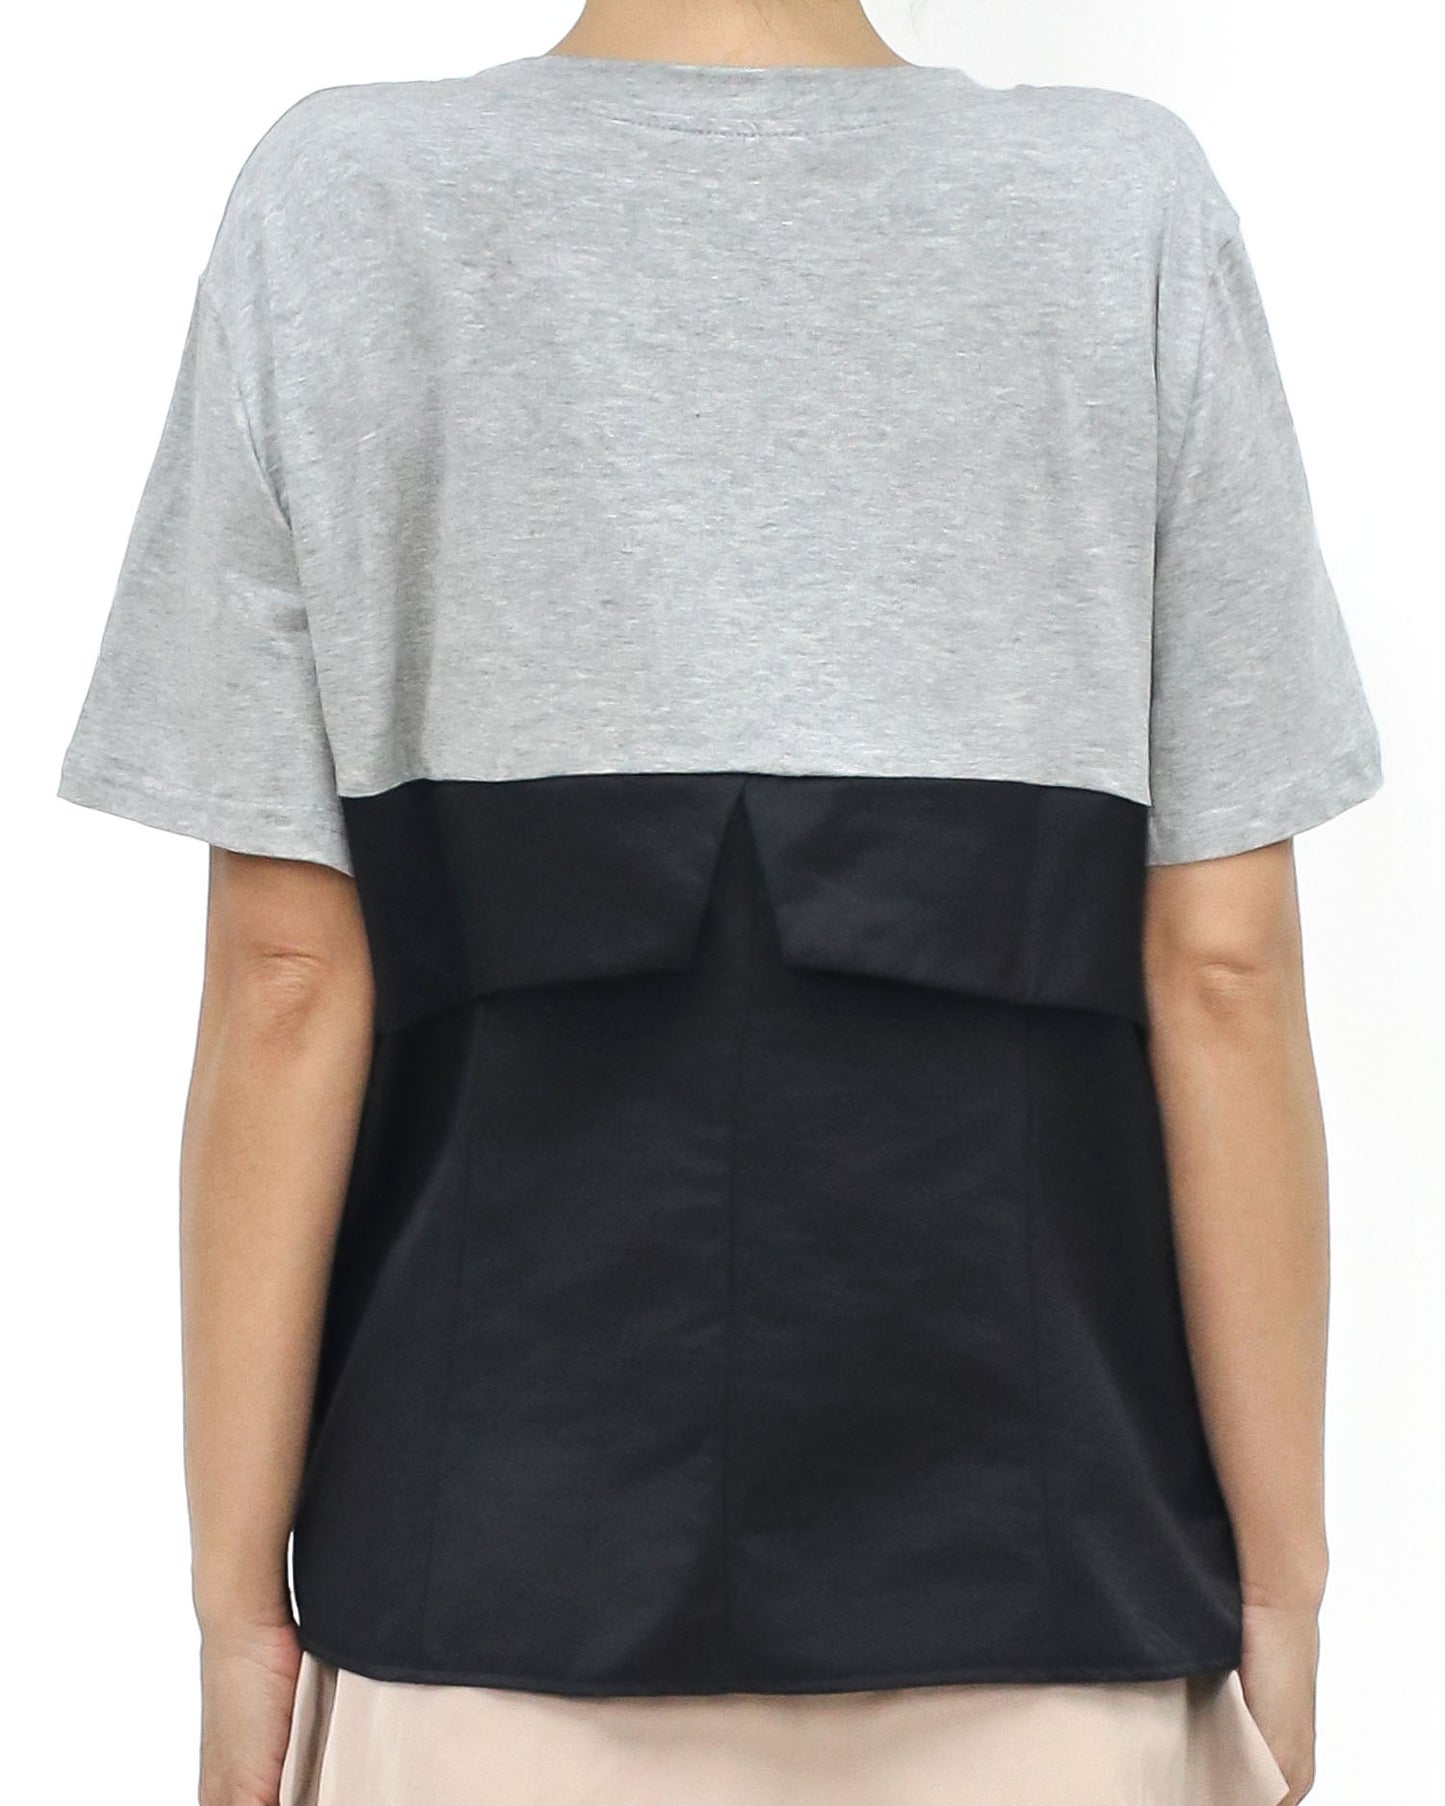 grey w/ black ruched contrast tee